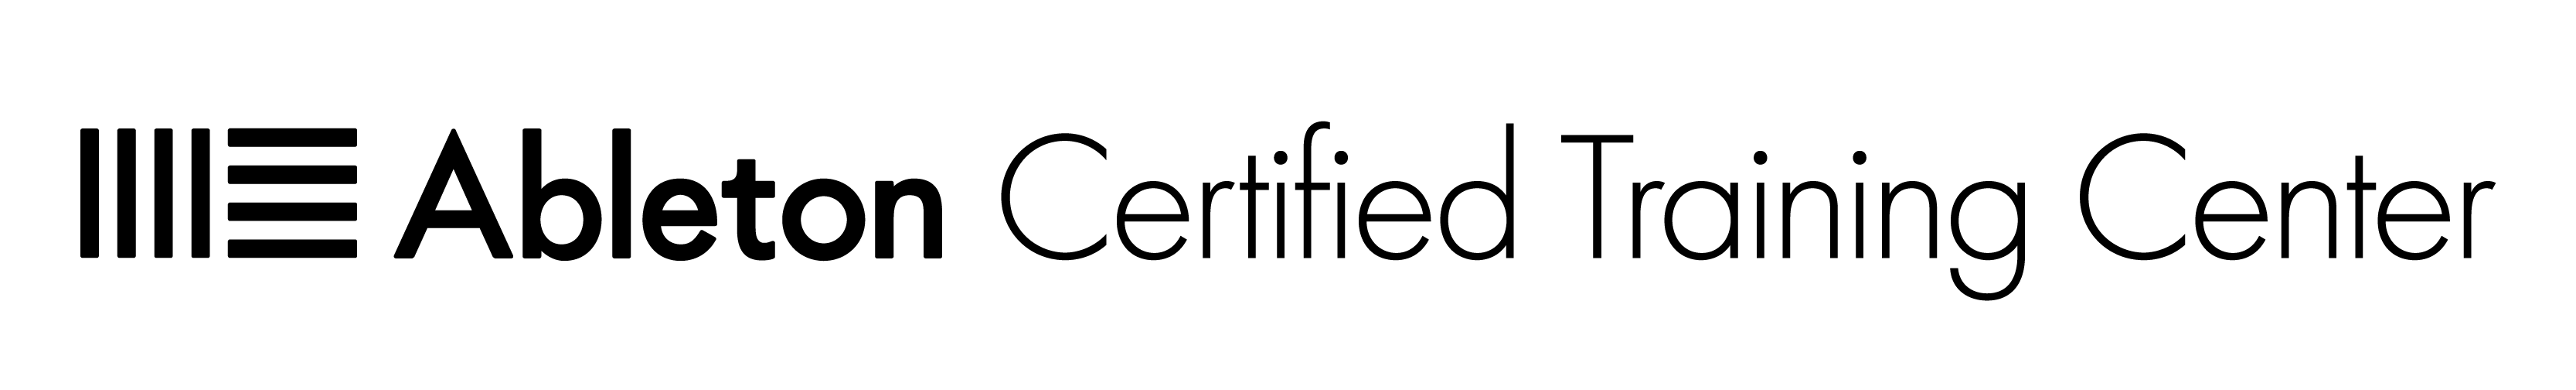 Ableton Certified